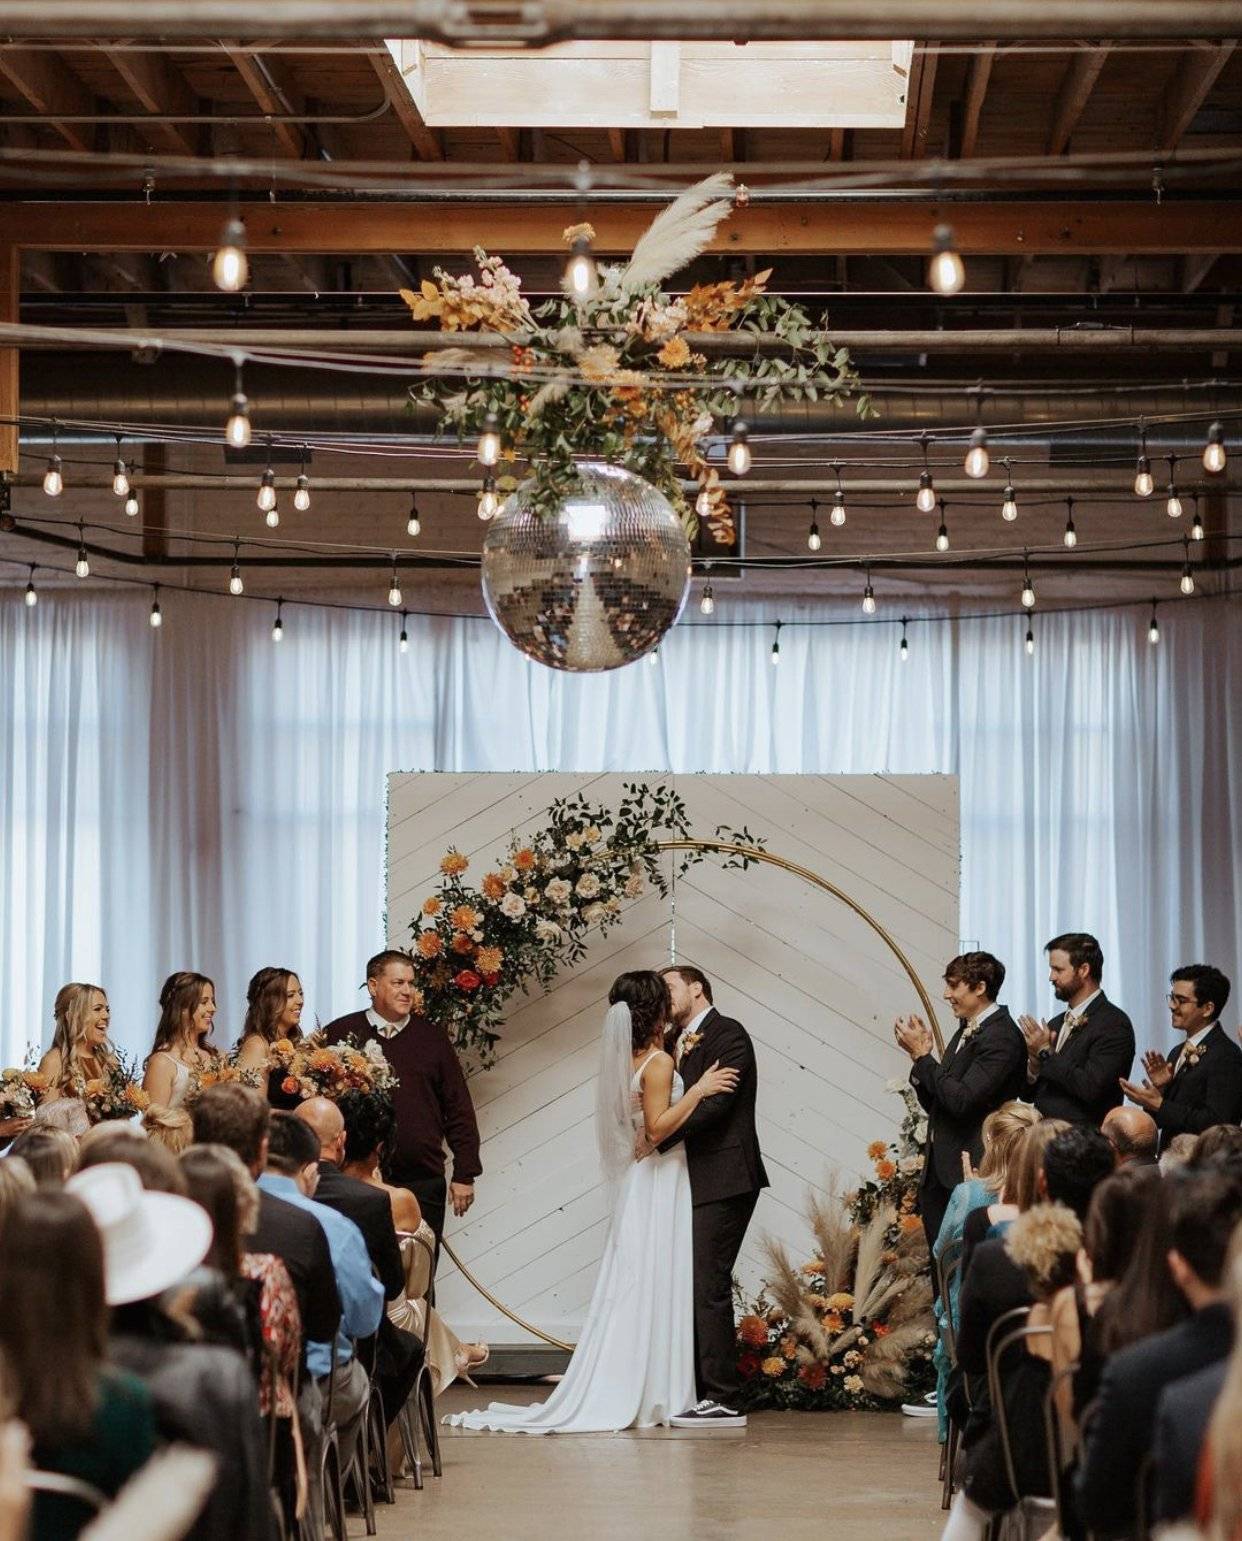 A bride and groom, kissing at the altar at skylight wedding venue in Denver, Colorado